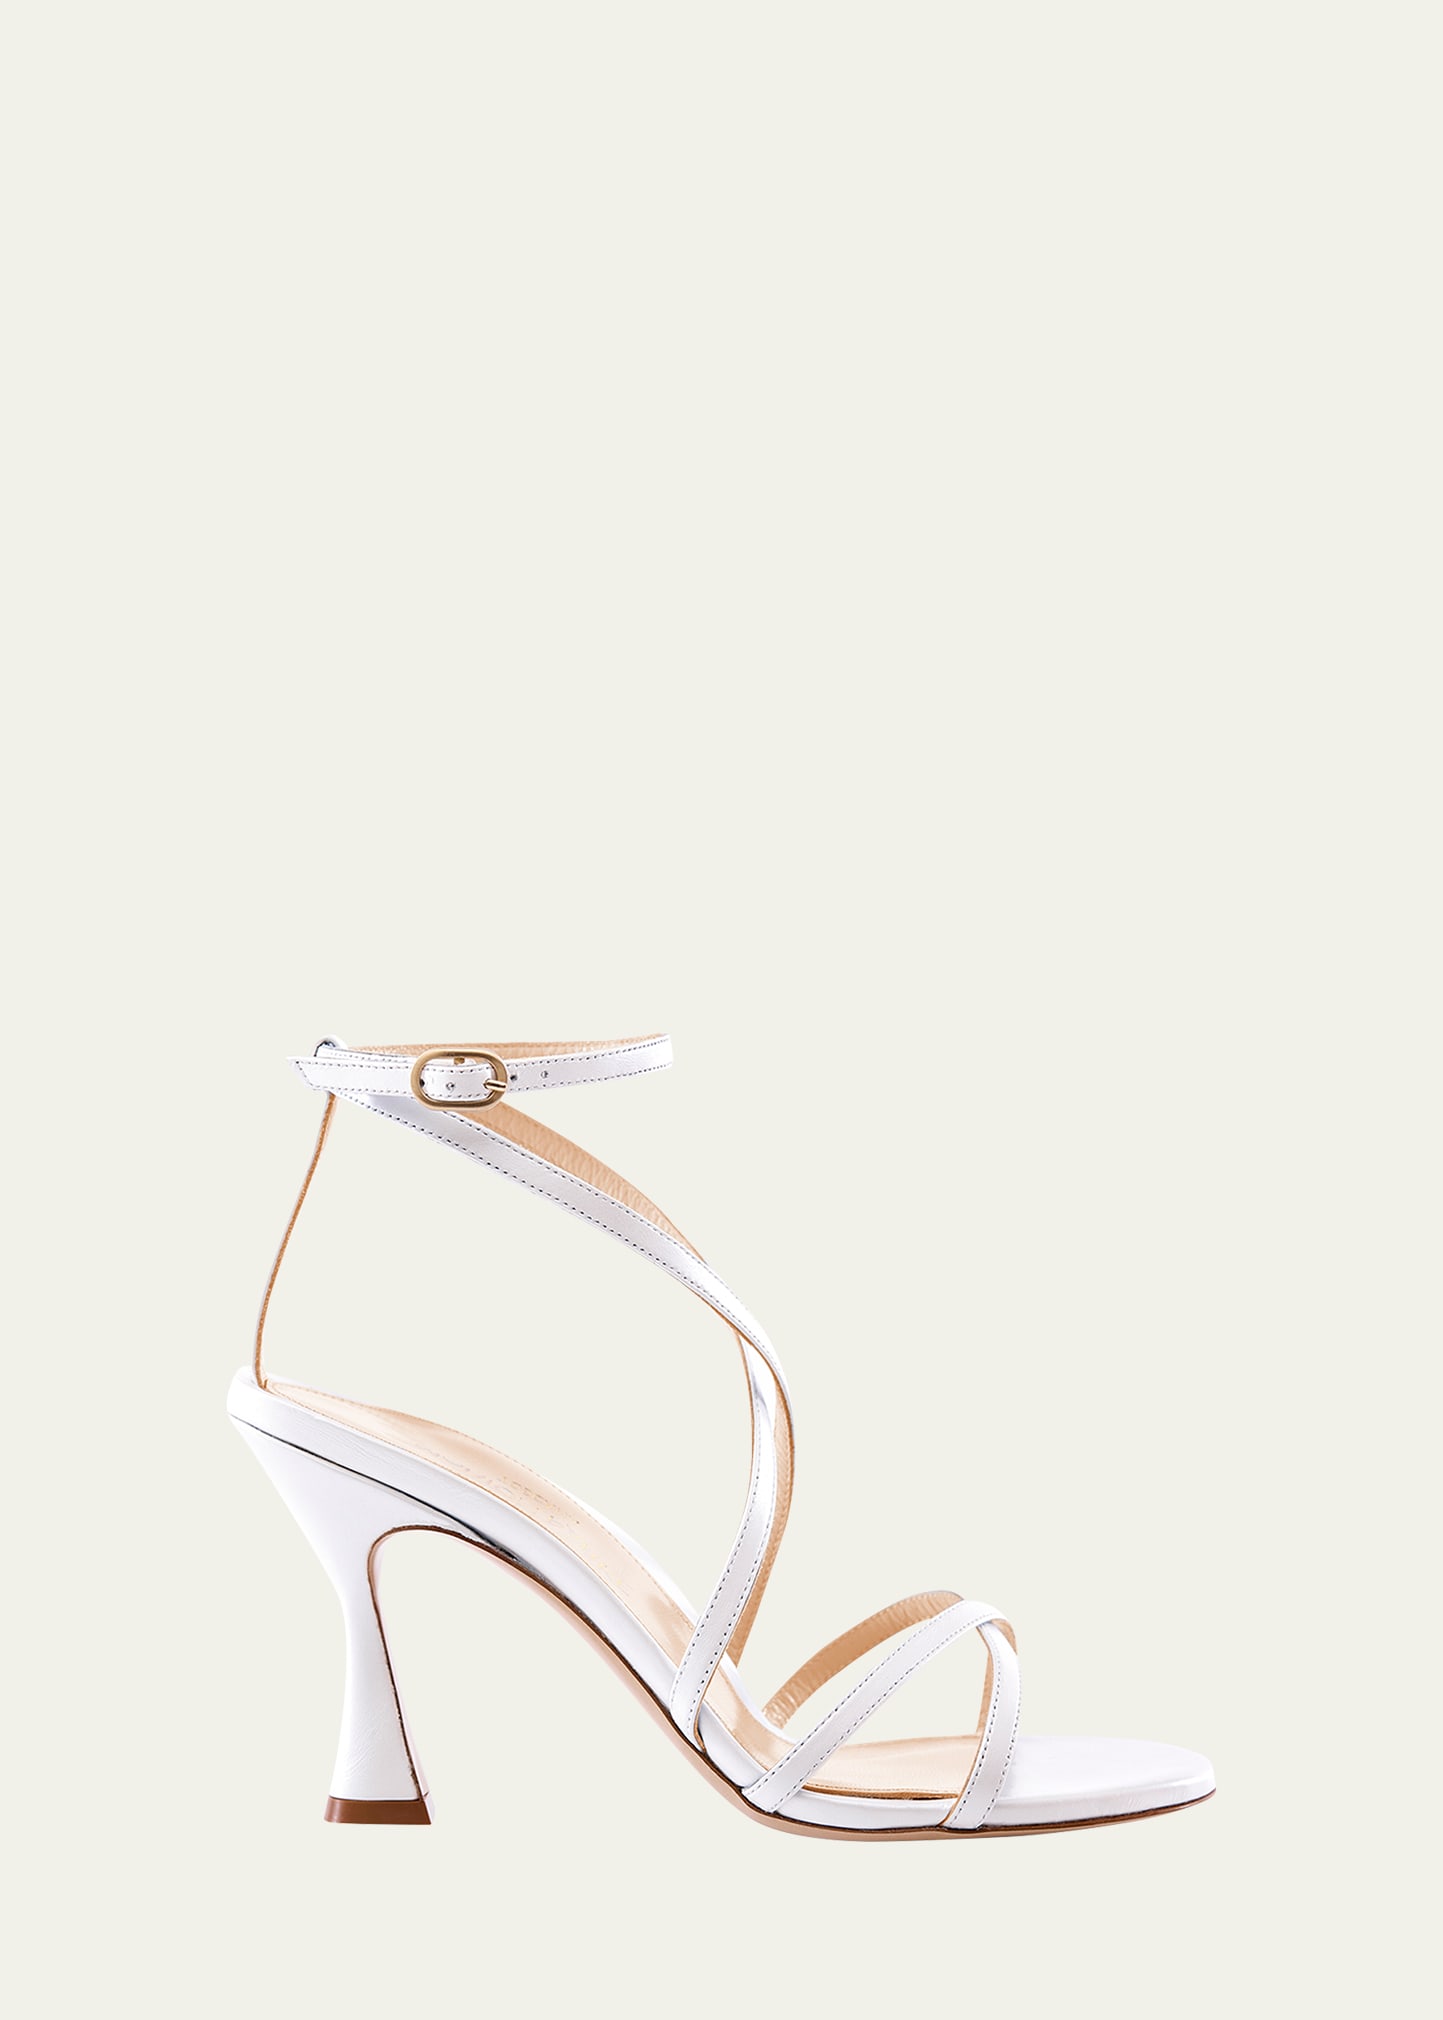 Marion Parke Lottie Leather Strappy Sandals